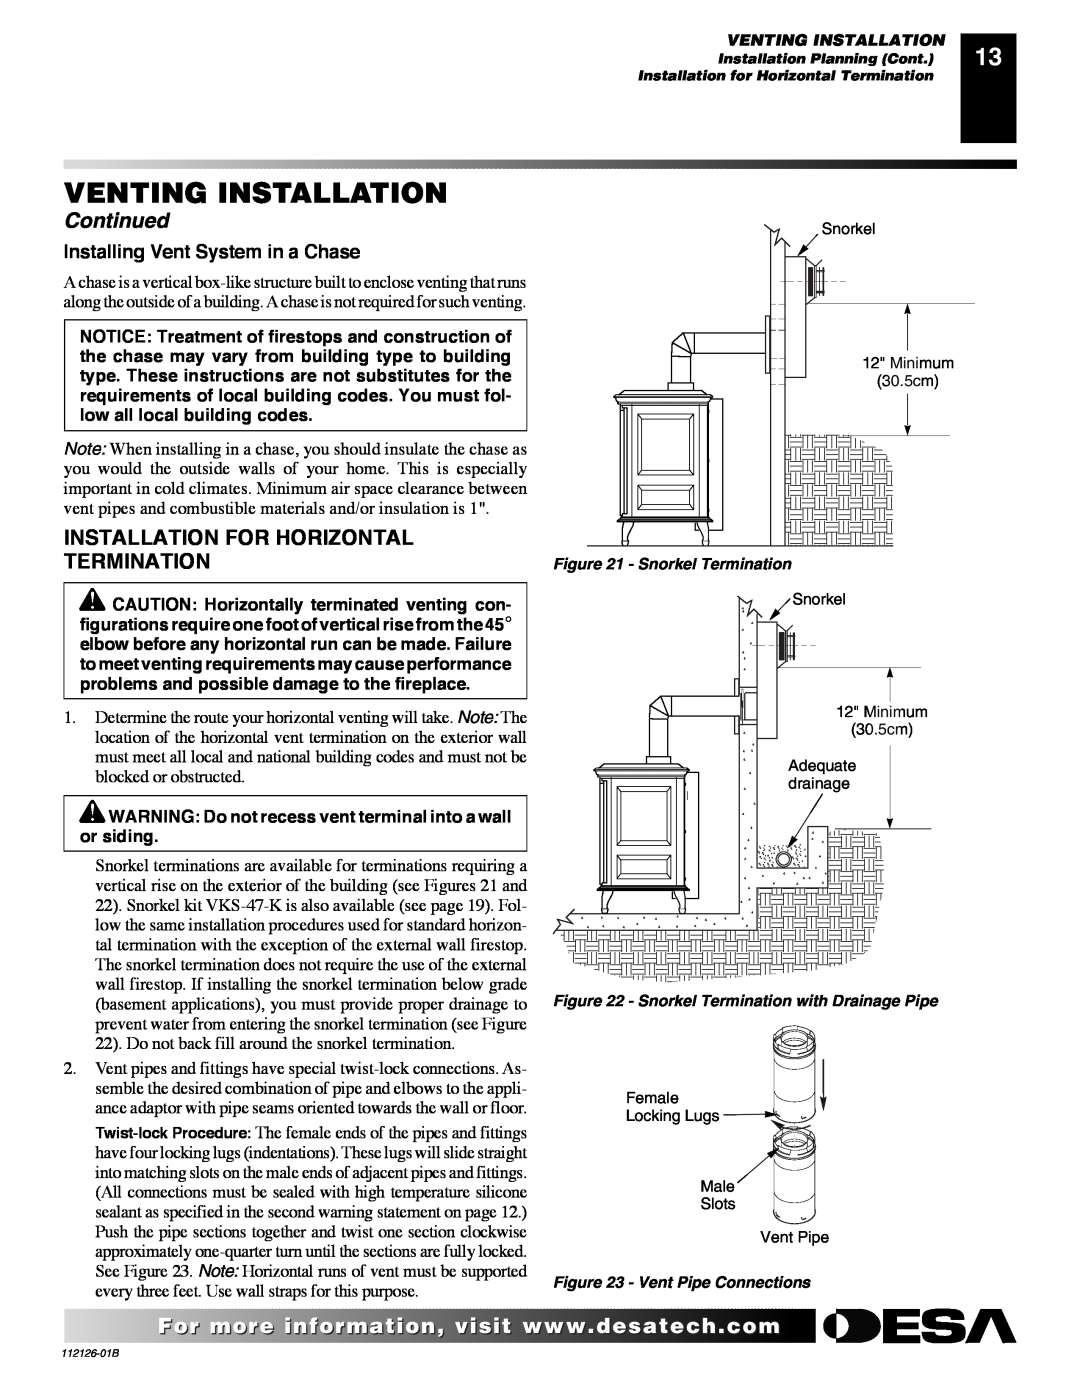 Desa SDVBPD Installation For Horizontal Termination, Venting Installation, Continued, Installing Vent System in a Chase 